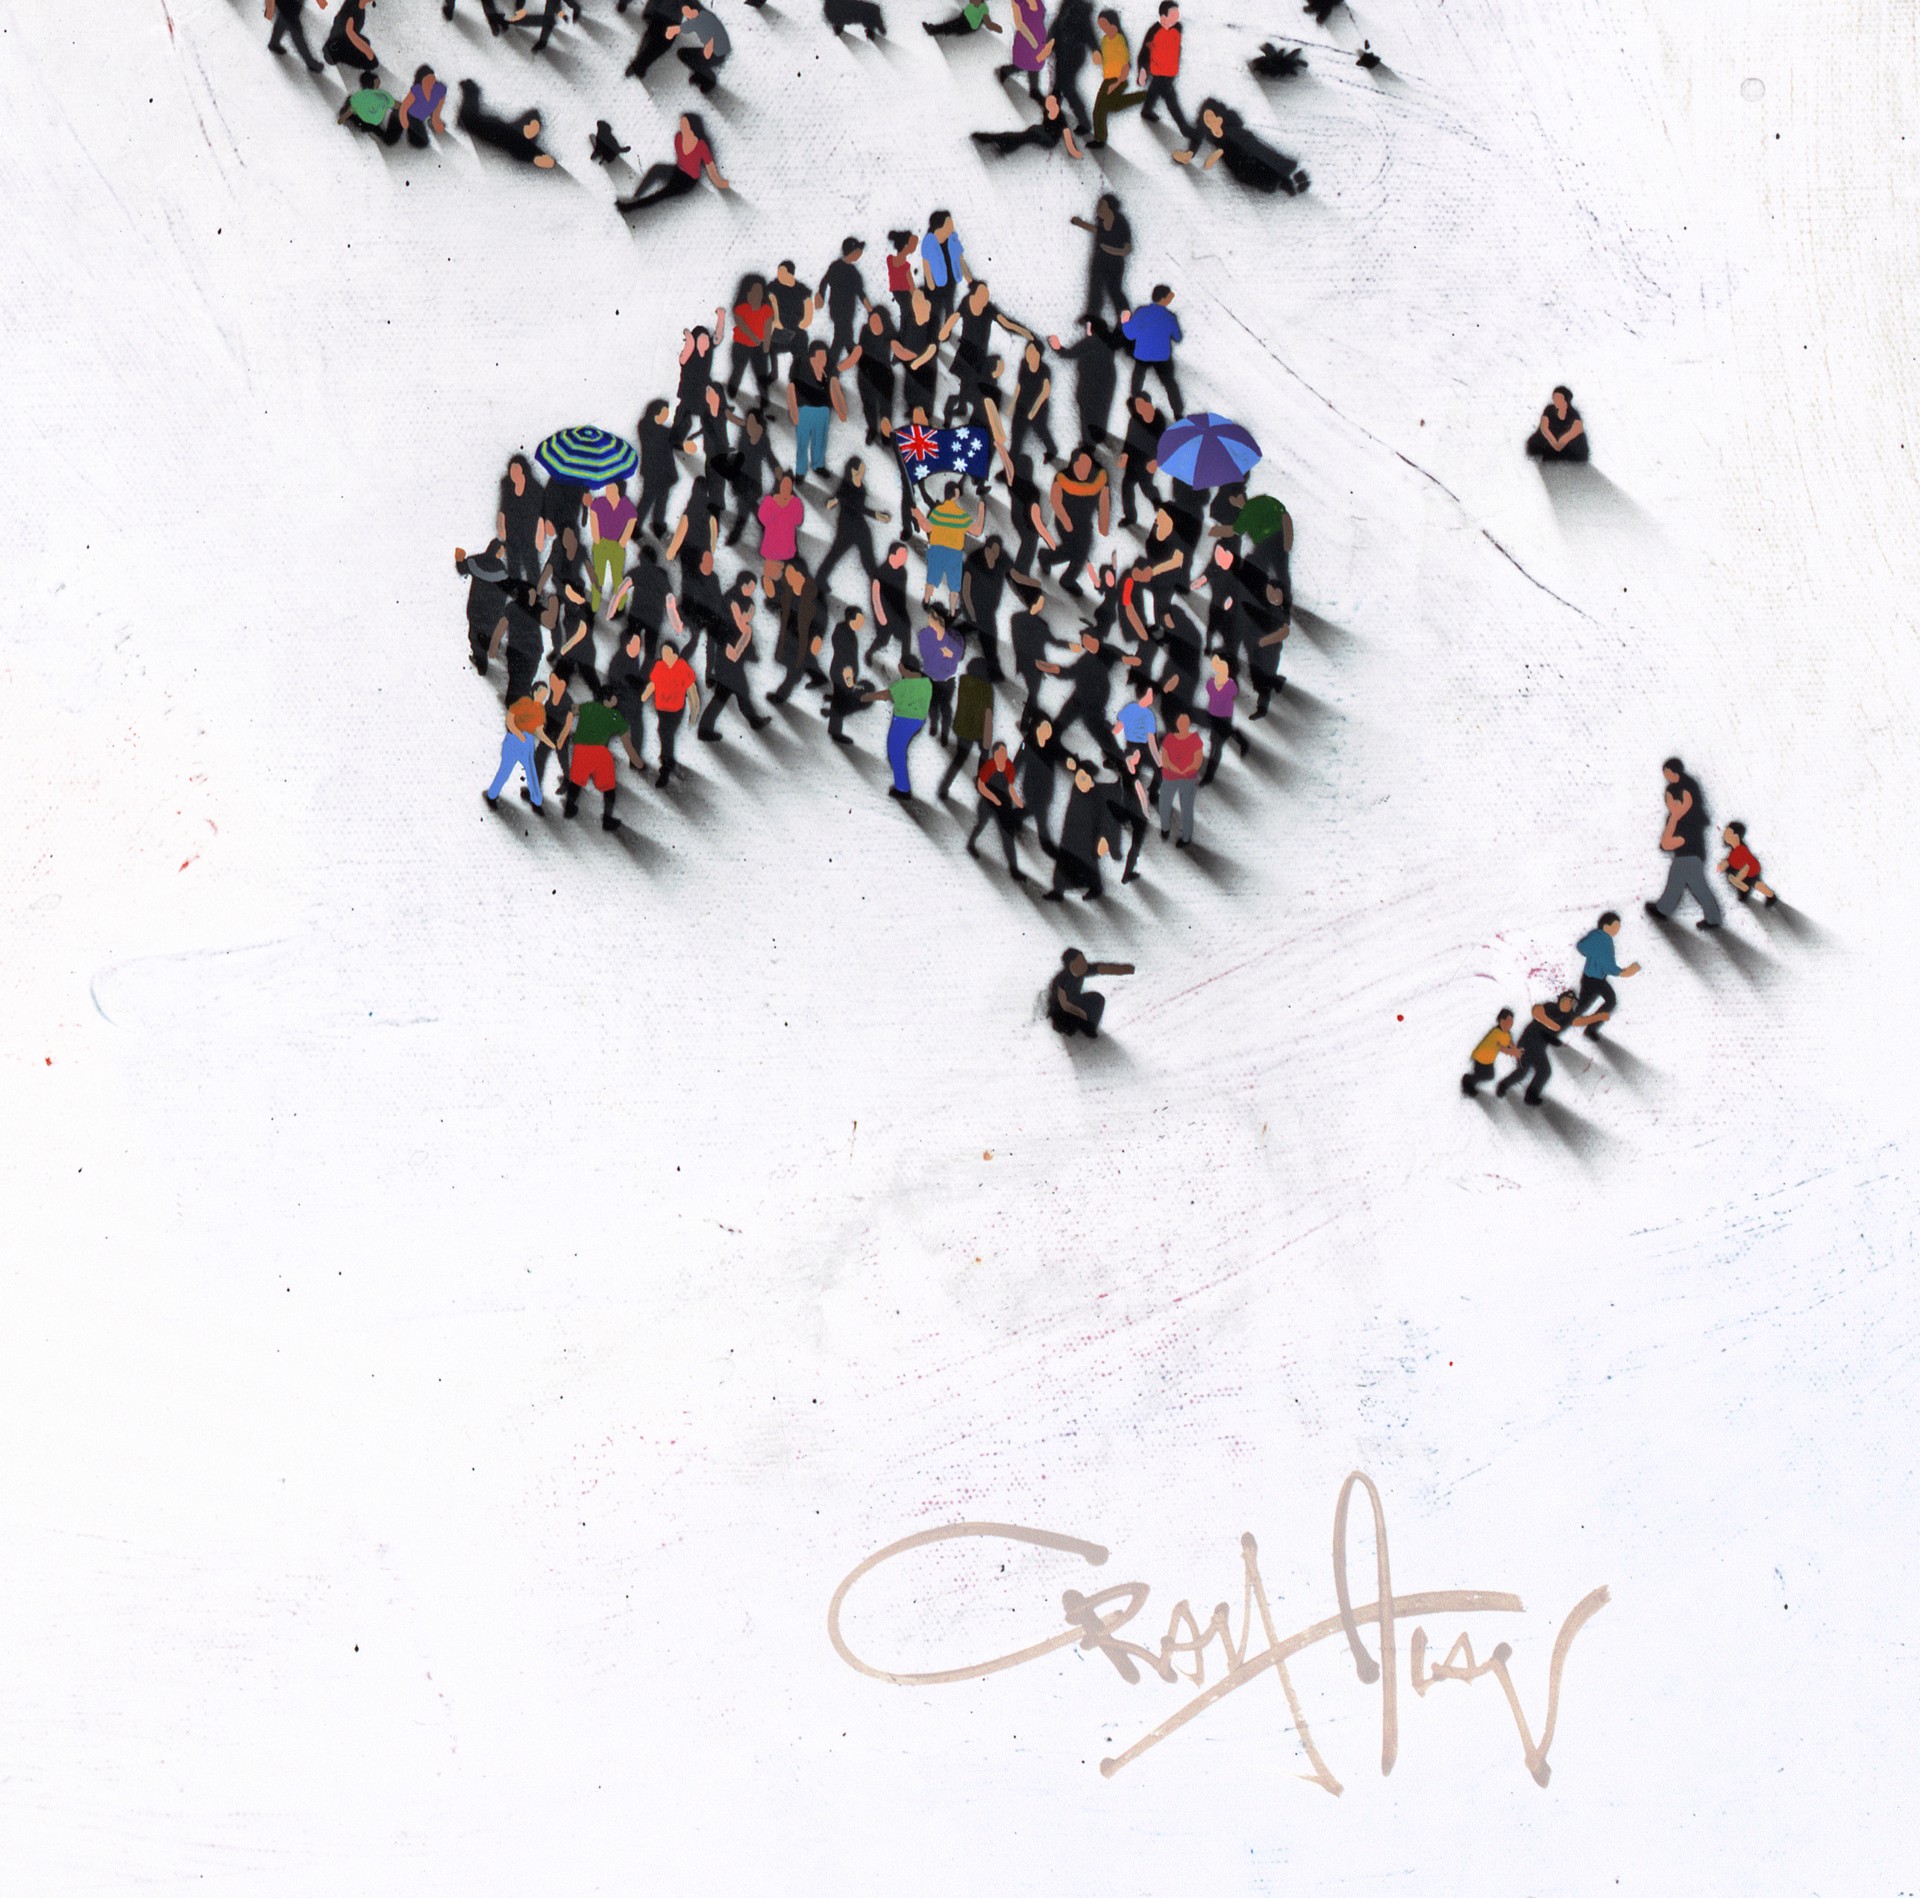 Global Family by Craig Alan, Populus Conceptual